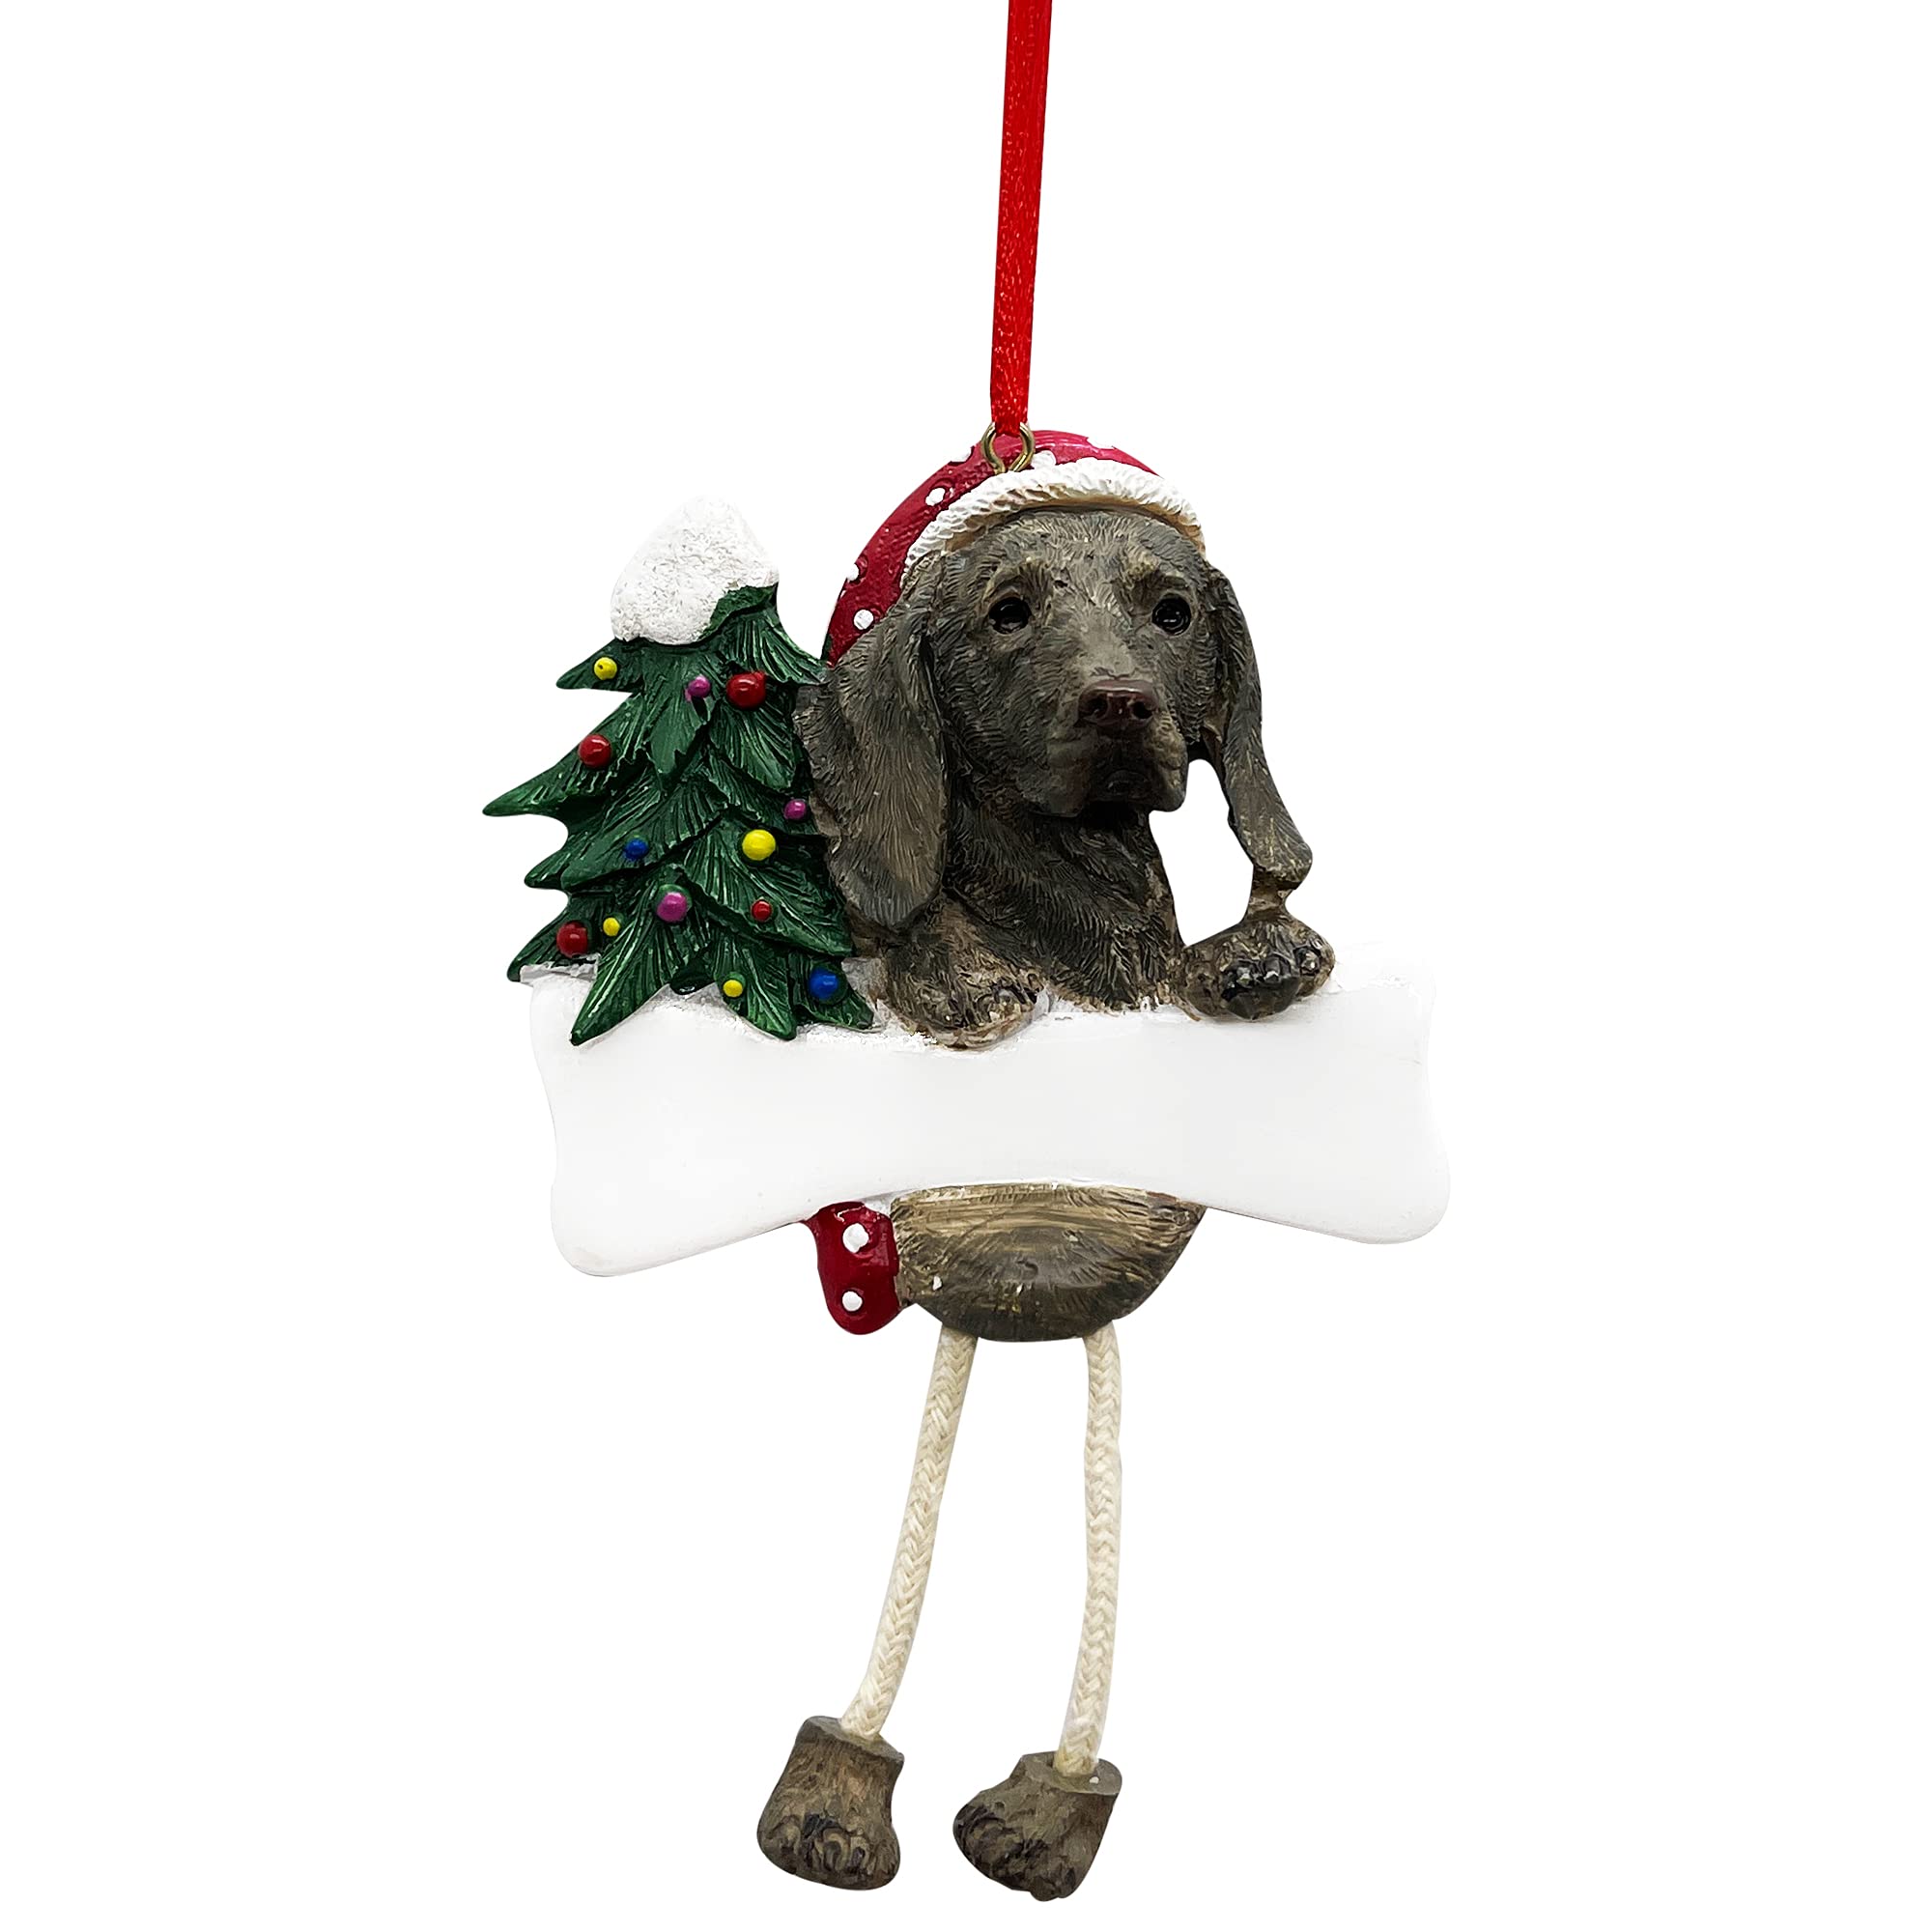 Weimaraner Ornament with Unique "Dangling Legs" Hand Painted and Easily Personalized Christmas Ornament